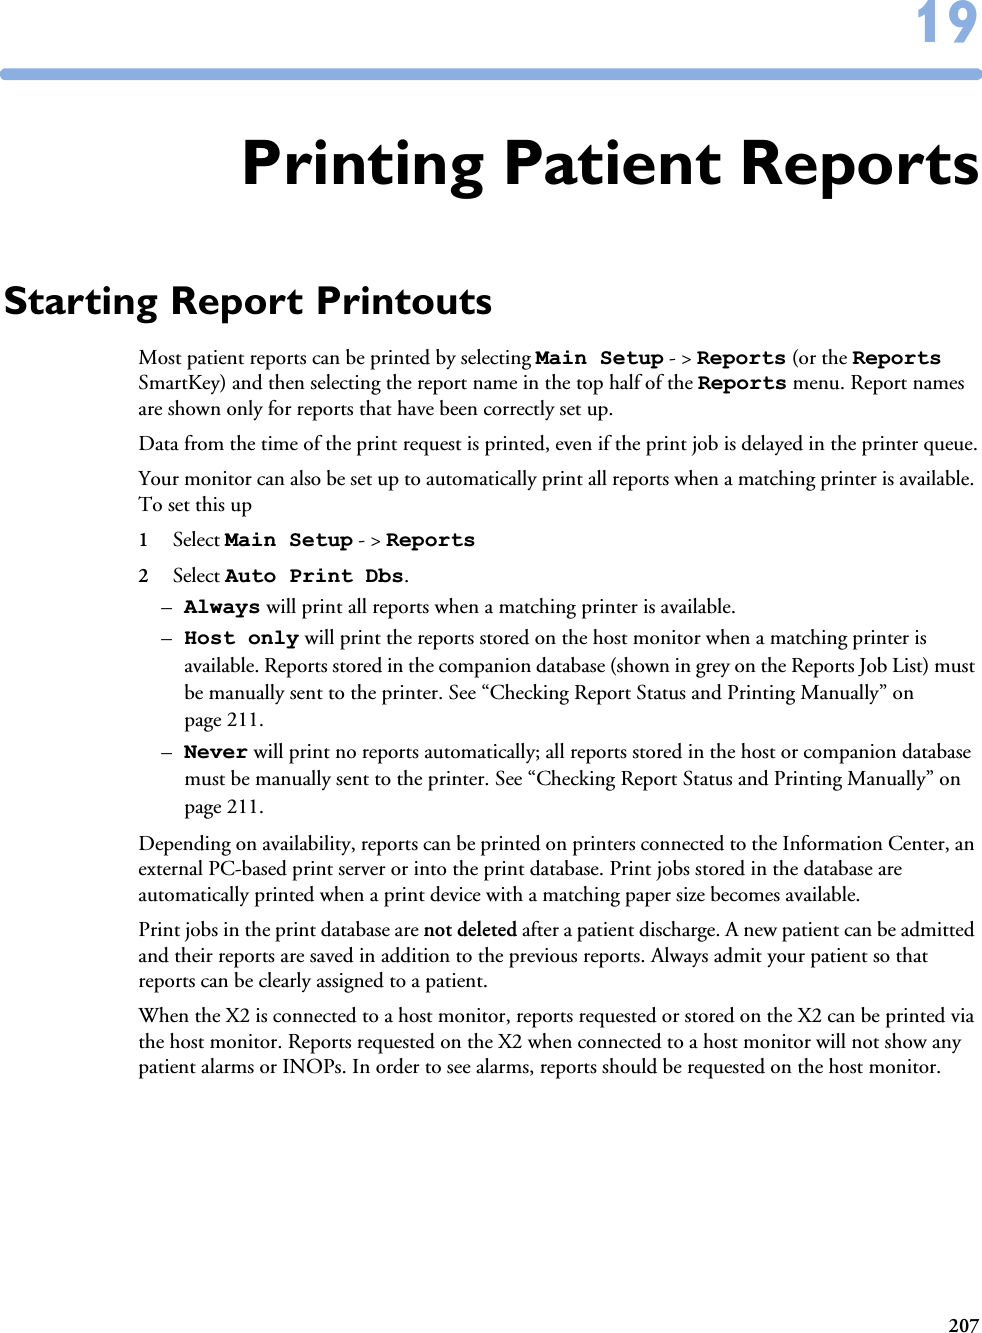 2071919Printing Patient ReportsStarting Report PrintoutsMost patient reports can be printed by selecting Main Setup - &gt; Reports (or the Reports SmartKey) and then selecting the report name in the top half of the Reports menu. Report names are shown only for reports that have been correctly set up. Data from the time of the print request is printed, even if the print job is delayed in the printer queue.Your monitor can also be set up to automatically print all reports when a matching printer is available. To set this up 1Select Main Setup - &gt; Reports 2Select Auto Print Dbs. –Always will print all reports when a matching printer is available. –Host only will print the reports stored on the host monitor when a matching printer is available. Reports stored in the companion database (shown in grey on the Reports Job List) must be manually sent to the printer. See “Checking Report Status and Printing Manually” on page 211.–Never will print no reports automatically; all reports stored in the host or companion database must be manually sent to the printer. See “Checking Report Status and Printing Manually” on page 211.Depending on availability, reports can be printed on printers connected to the Information Center, an external PC-based print server or into the print database. Print jobs stored in the database are automatically printed when a print device with a matching paper size becomes available. Print jobs in the print database are not deleted after a patient discharge. A new patient can be admitted and their reports are saved in addition to the previous reports. Always admit your patient so that reports can be clearly assigned to a patient. When the X2 is connected to a host monitor, reports requested or stored on the X2 can be printed via the host monitor. Reports requested on the X2 when connected to a host monitor will not show any patient alarms or INOPs. In order to see alarms, reports should be requested on the host monitor. 